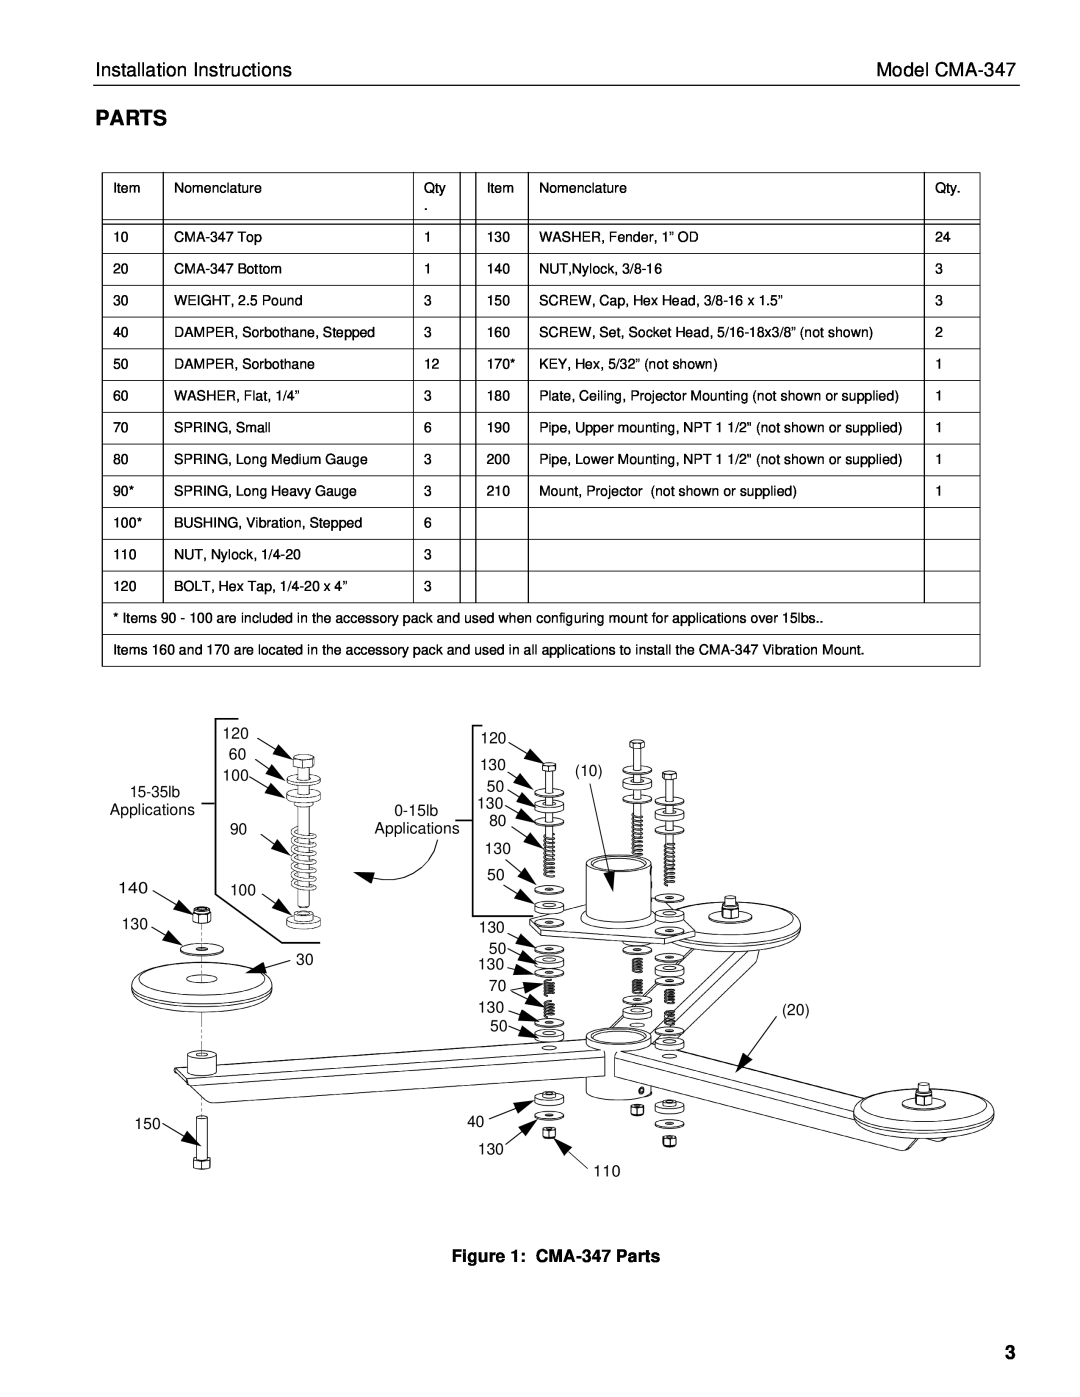 Chief Manufacturing installation instructions CMA-347Parts, Installation Instructions, Model CMA-347 